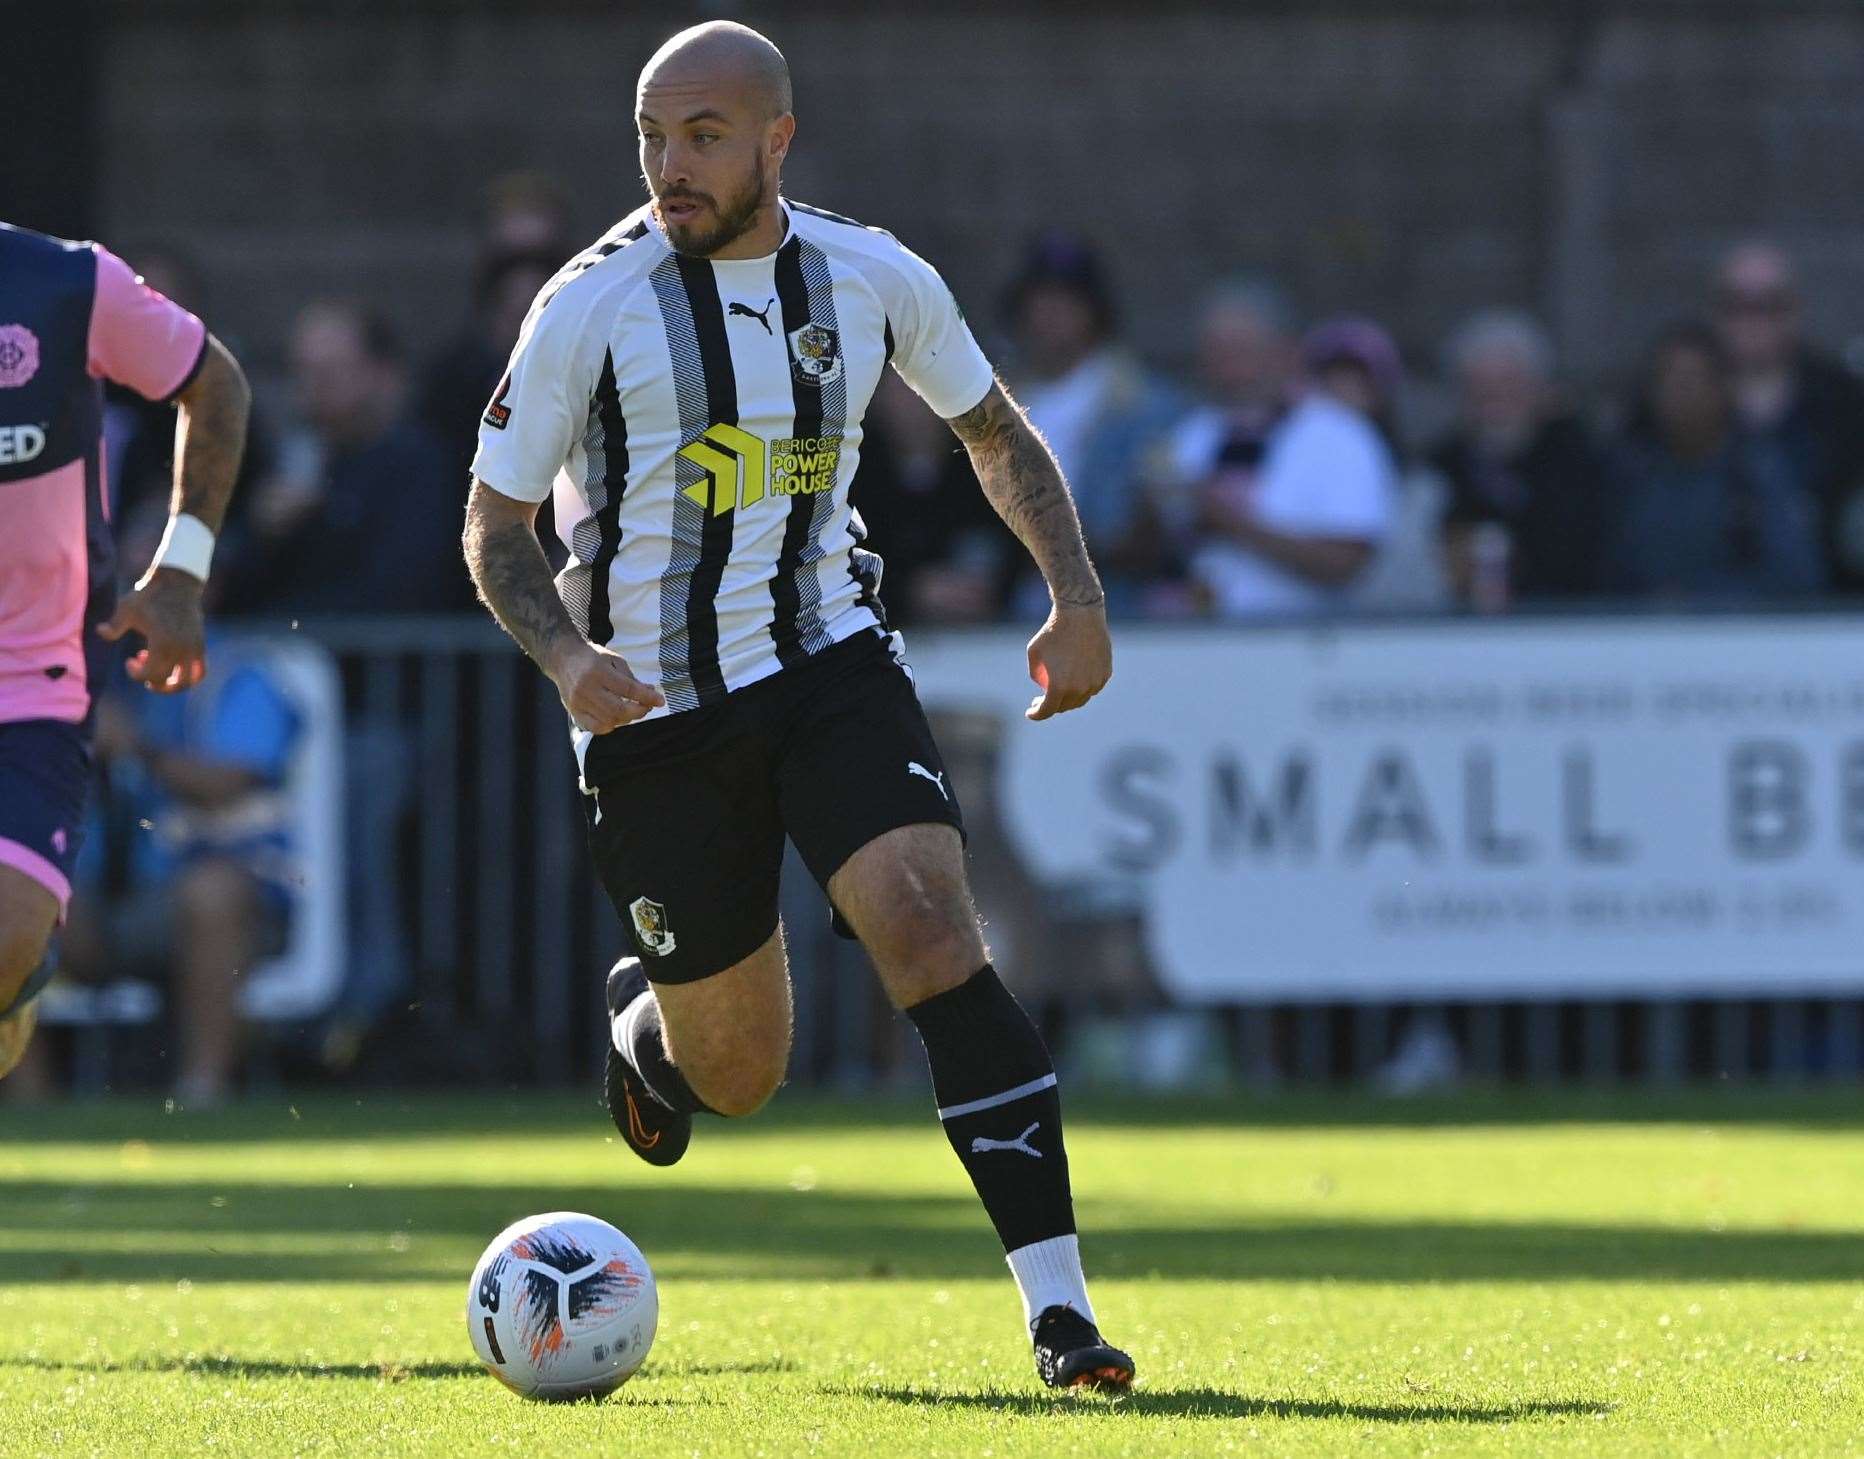 Samir Carruthers netted twice off the bench in Dartford's victory over Braintree. Picture: Keith Gillard